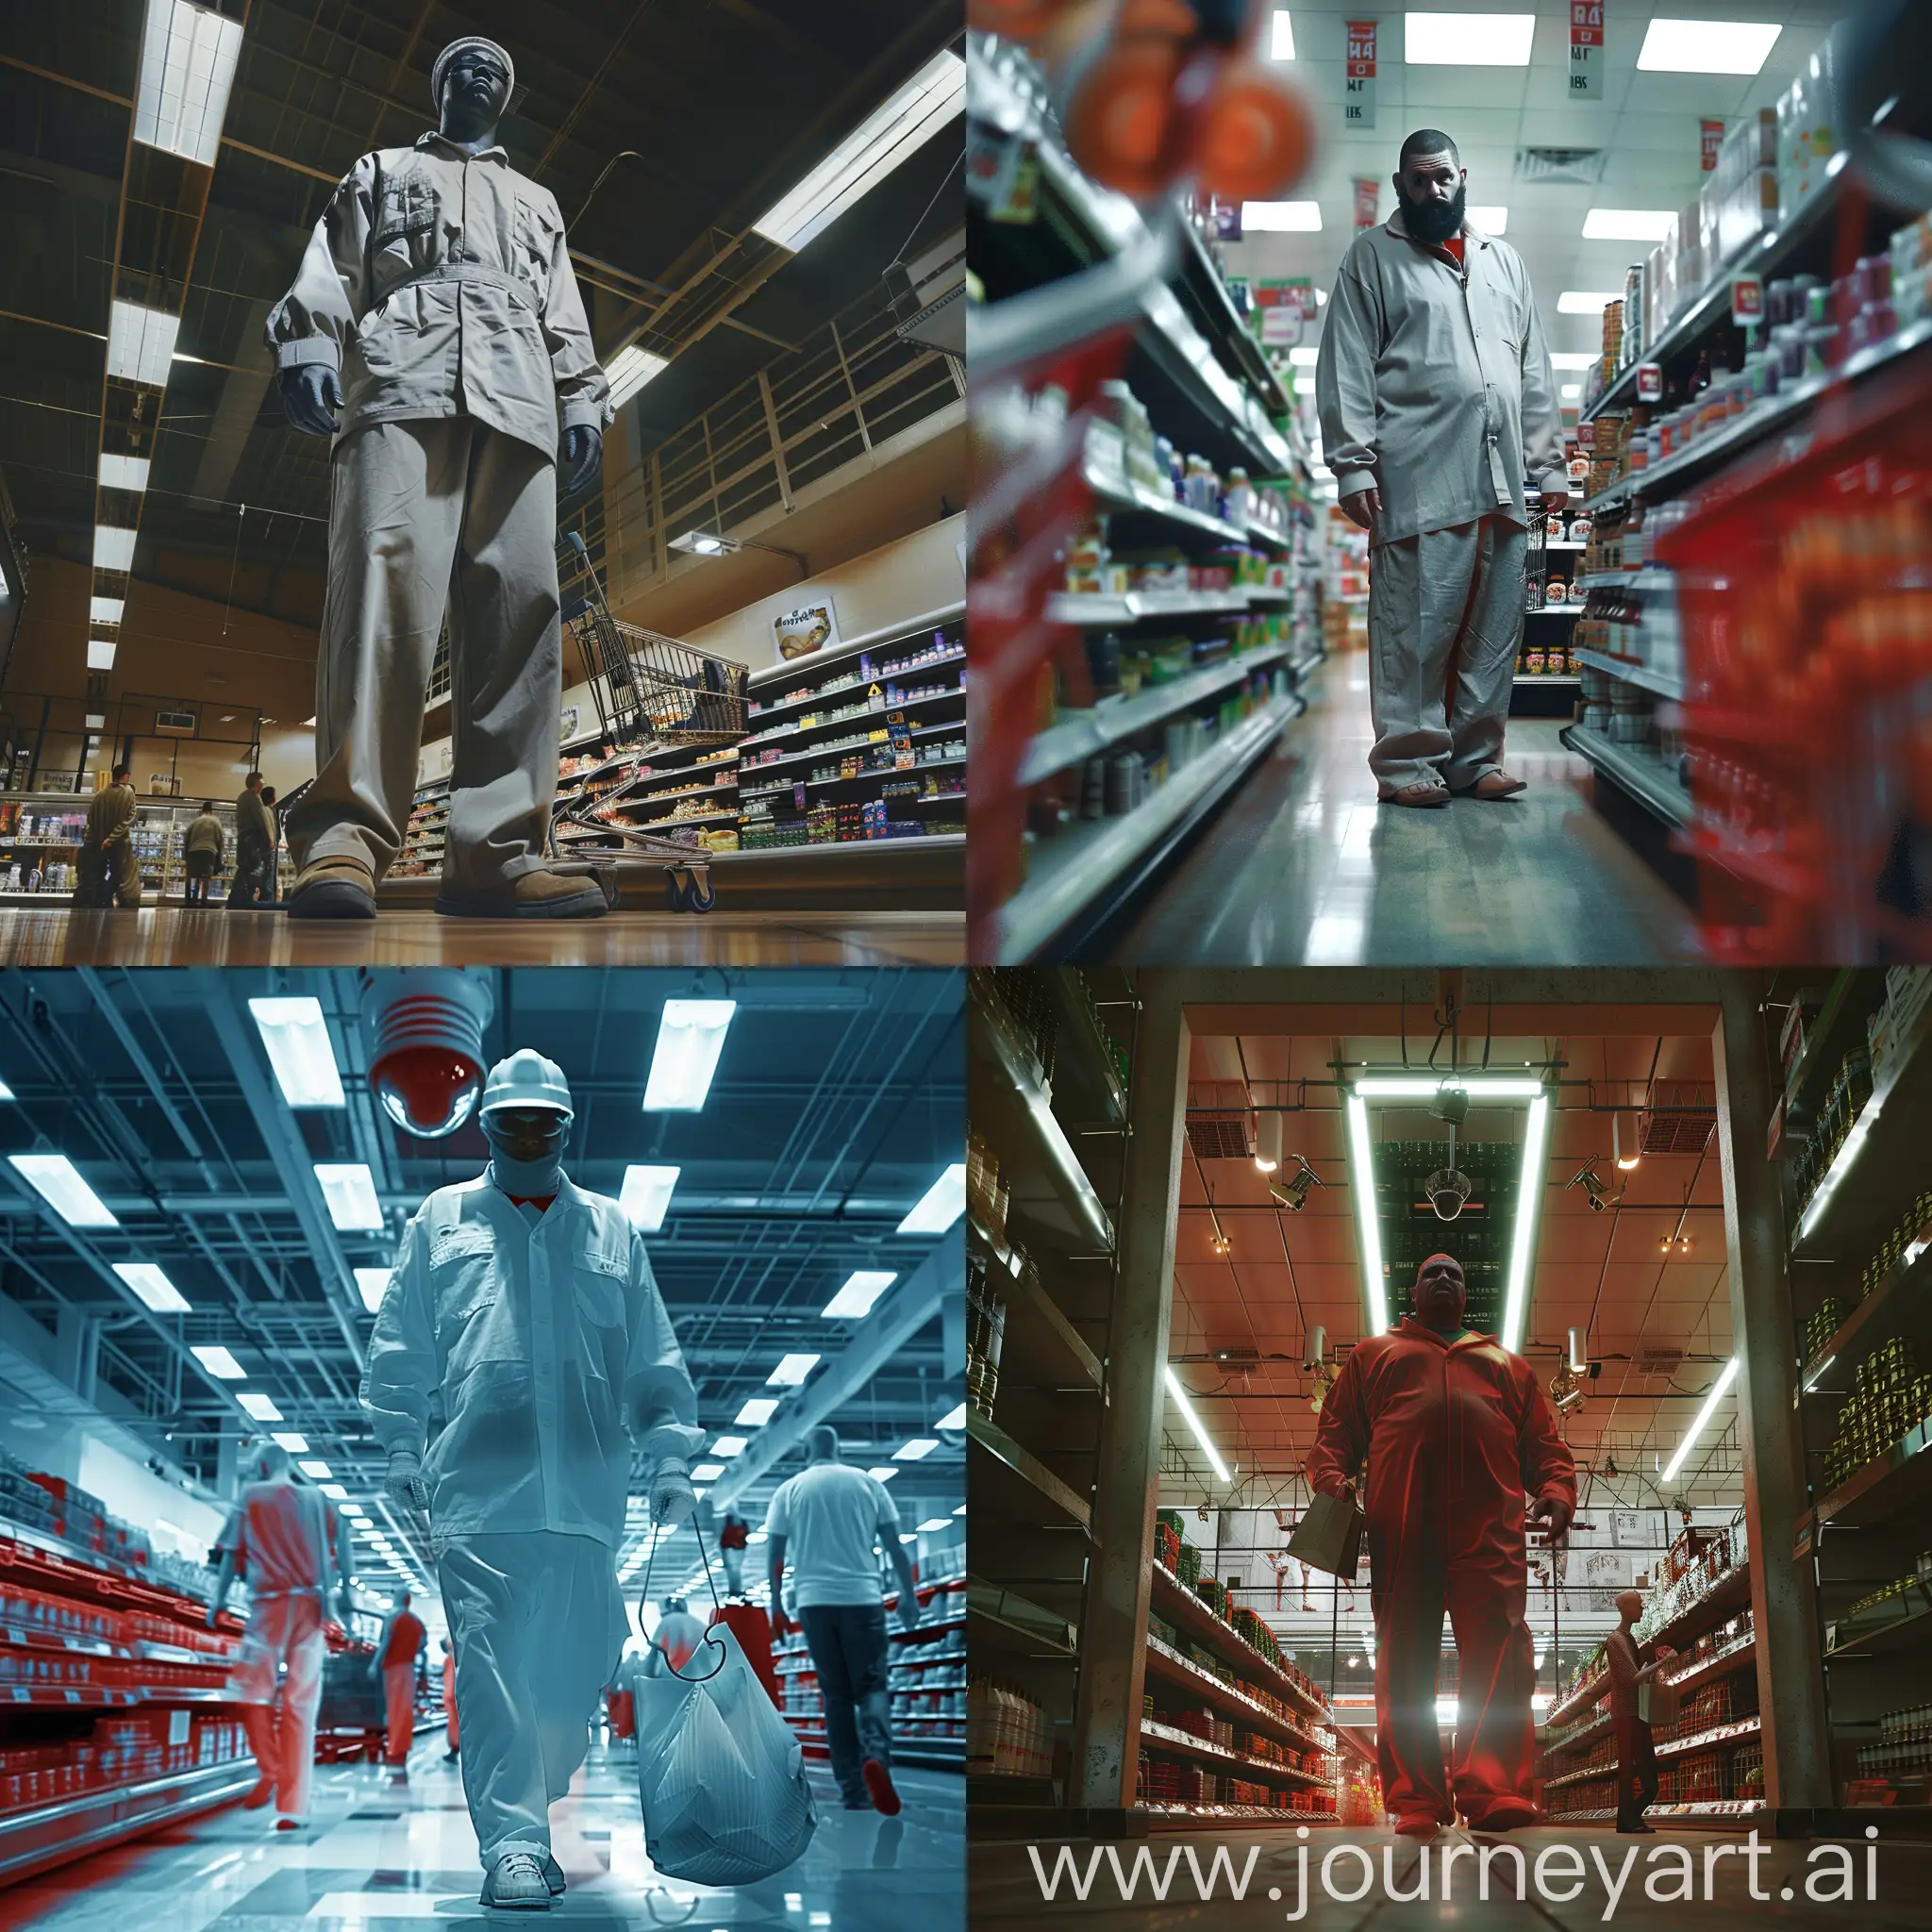 Tall-Prisoner-Shopping-in-Supermarket-Infrared-Security-View